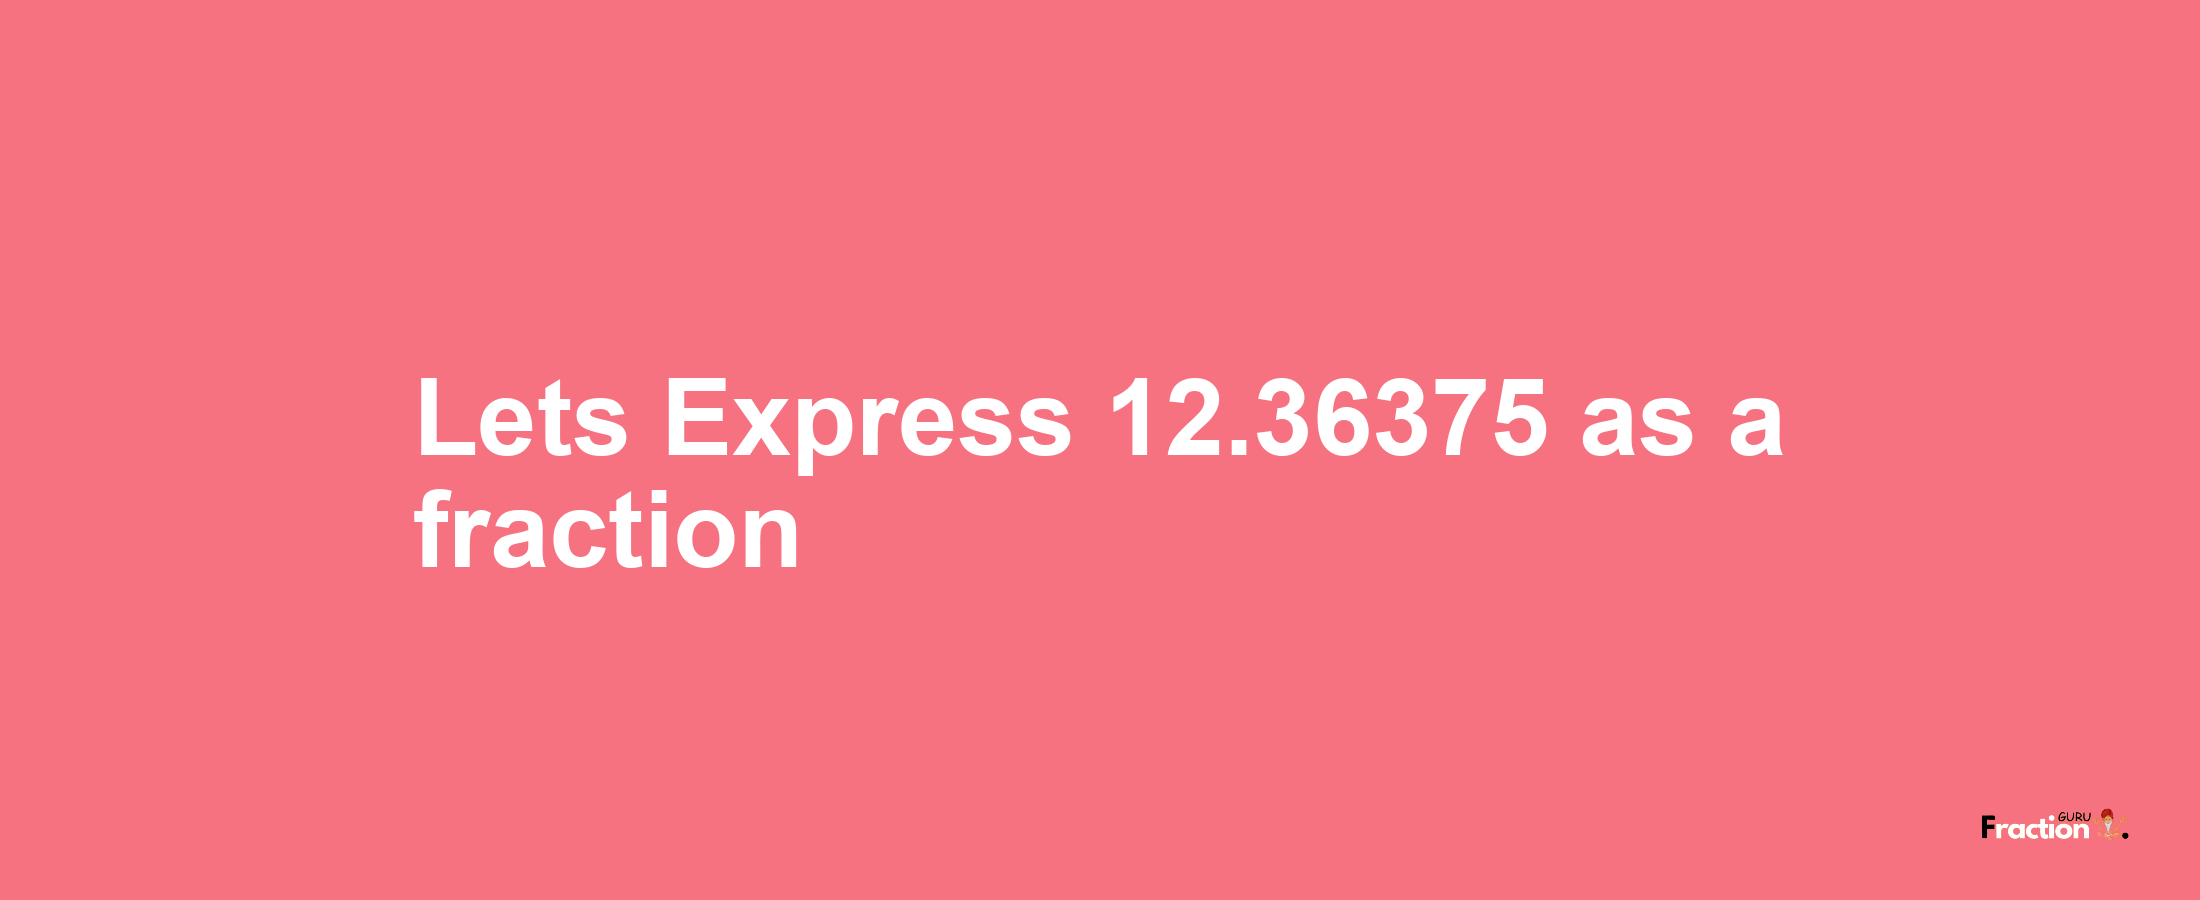 Lets Express 12.36375 as afraction